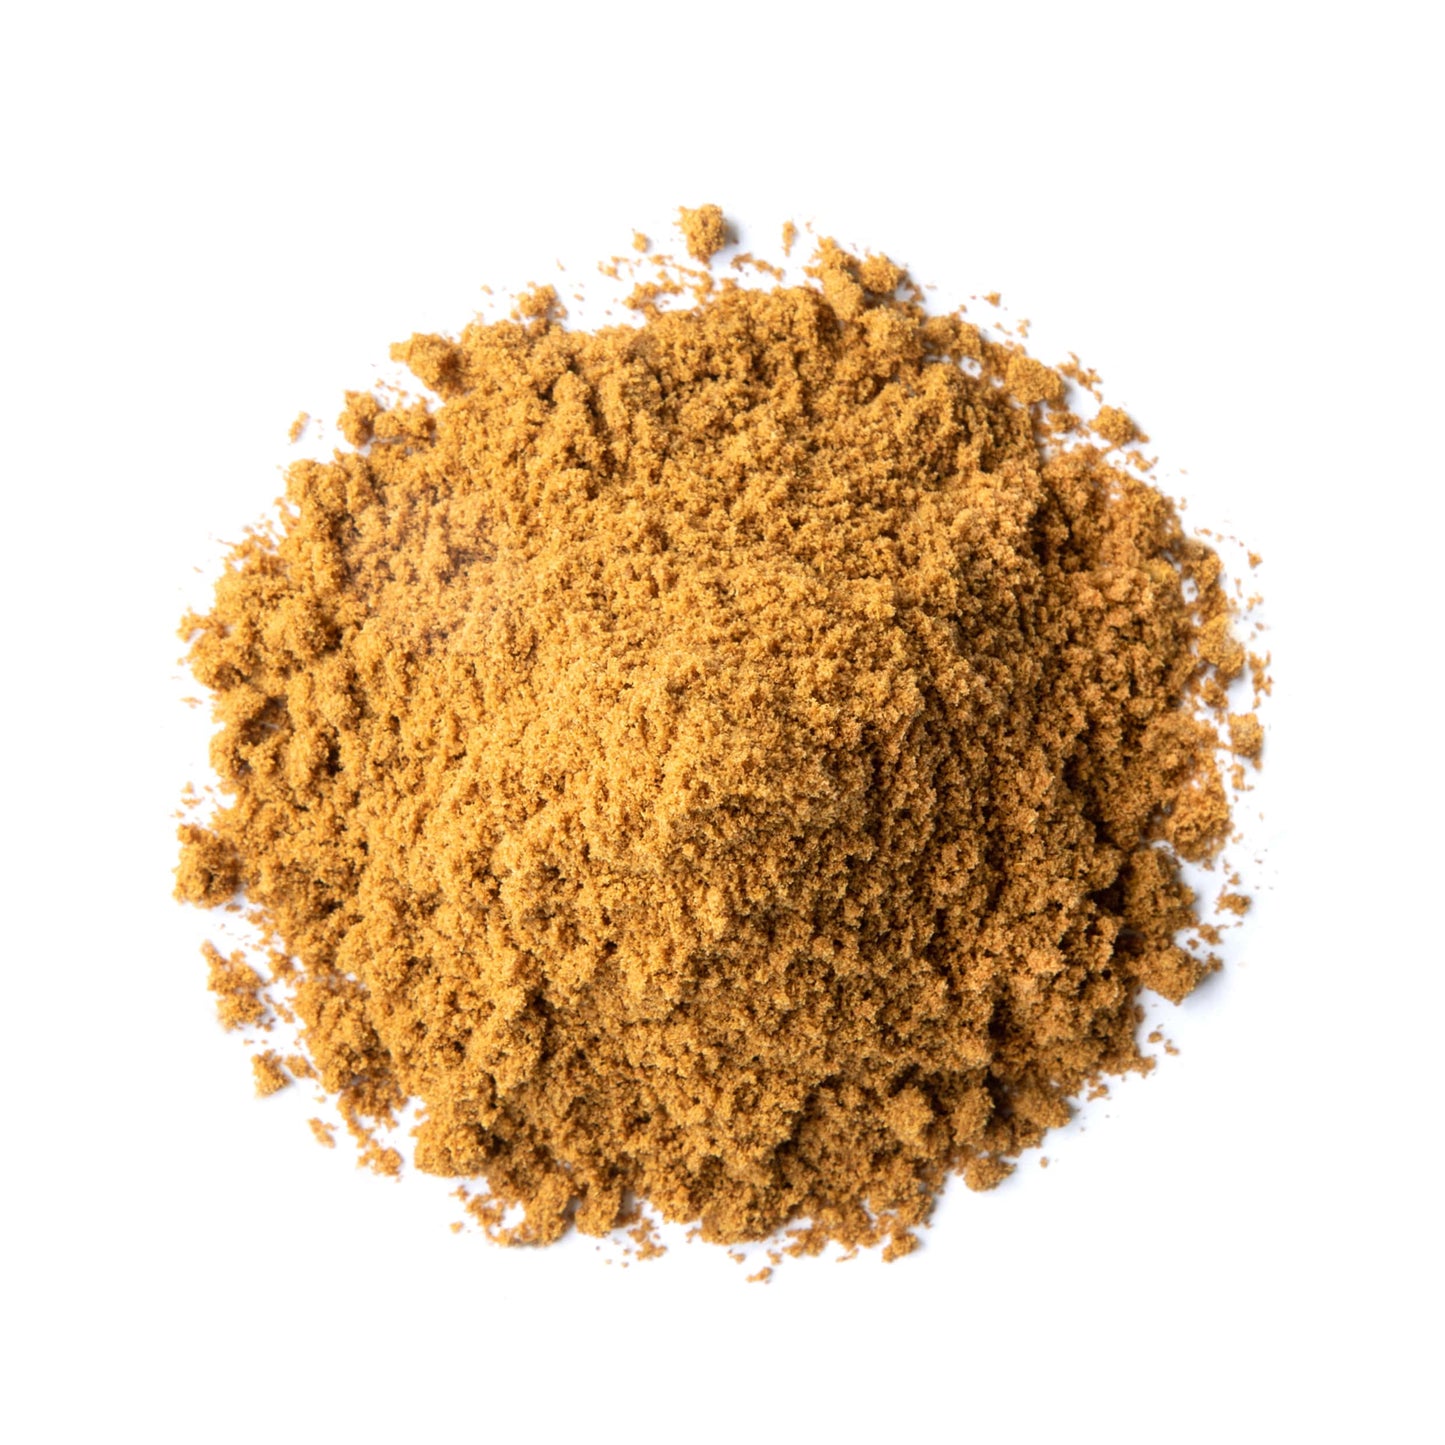 Cumin Powder — Non-GMO Verified, Finely Ground Dried Cumin Seeds, Jeera, Bulk, Vegan, Kosher. High in Iron, Magnesium, and Calcium. Great for Mexican, Middle Eastern, and Indian Cuisines